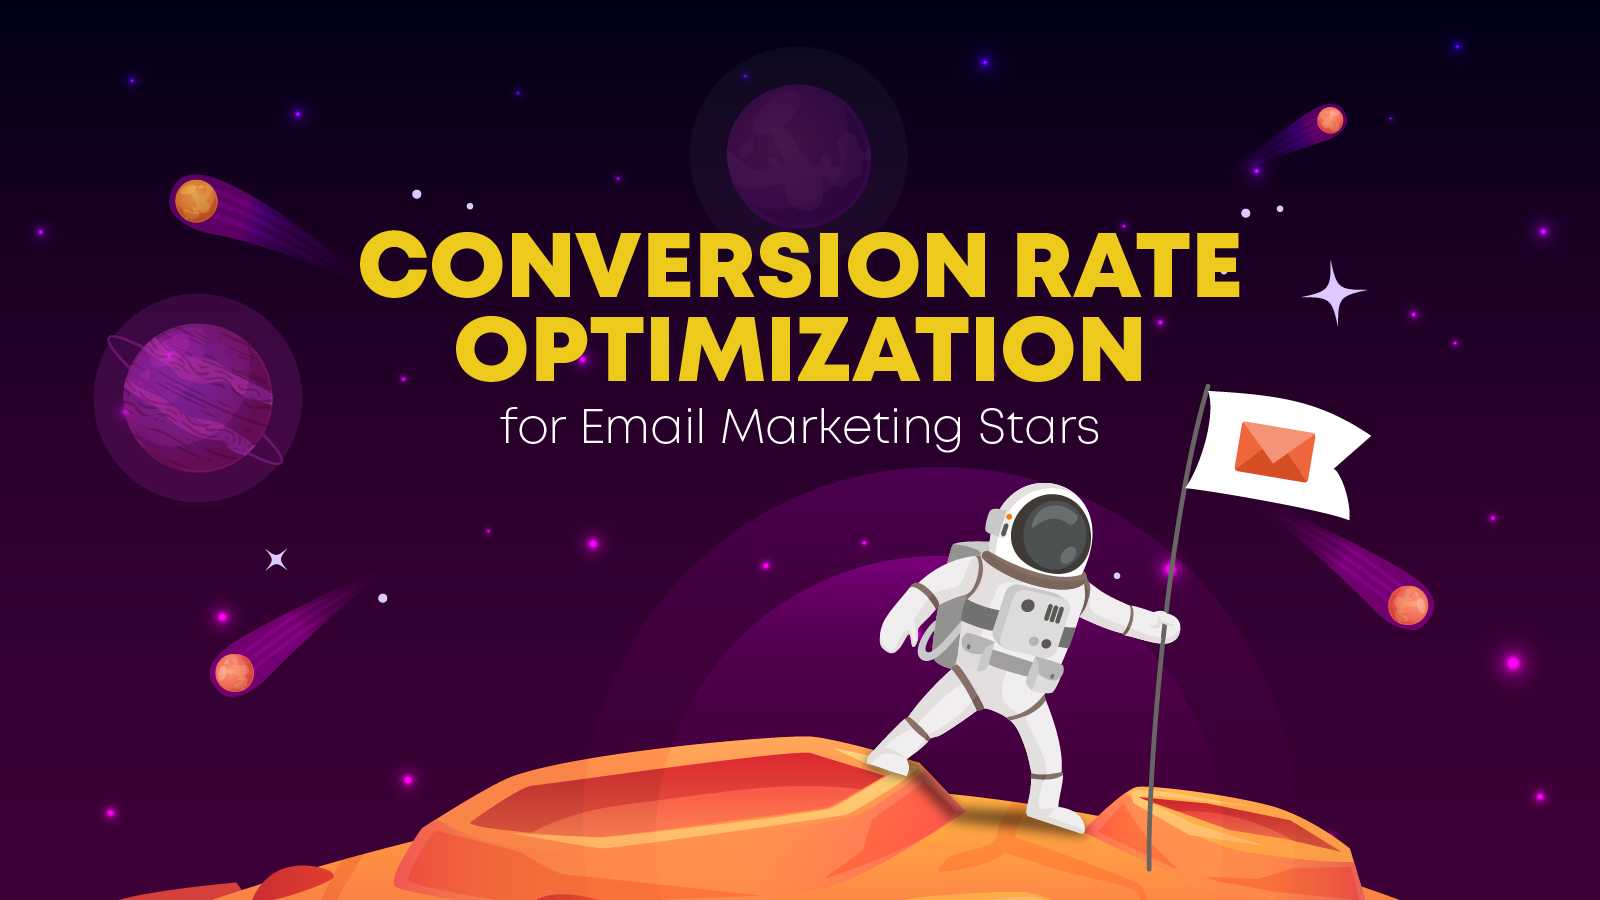 How to use conversion rate optimization in email marketing